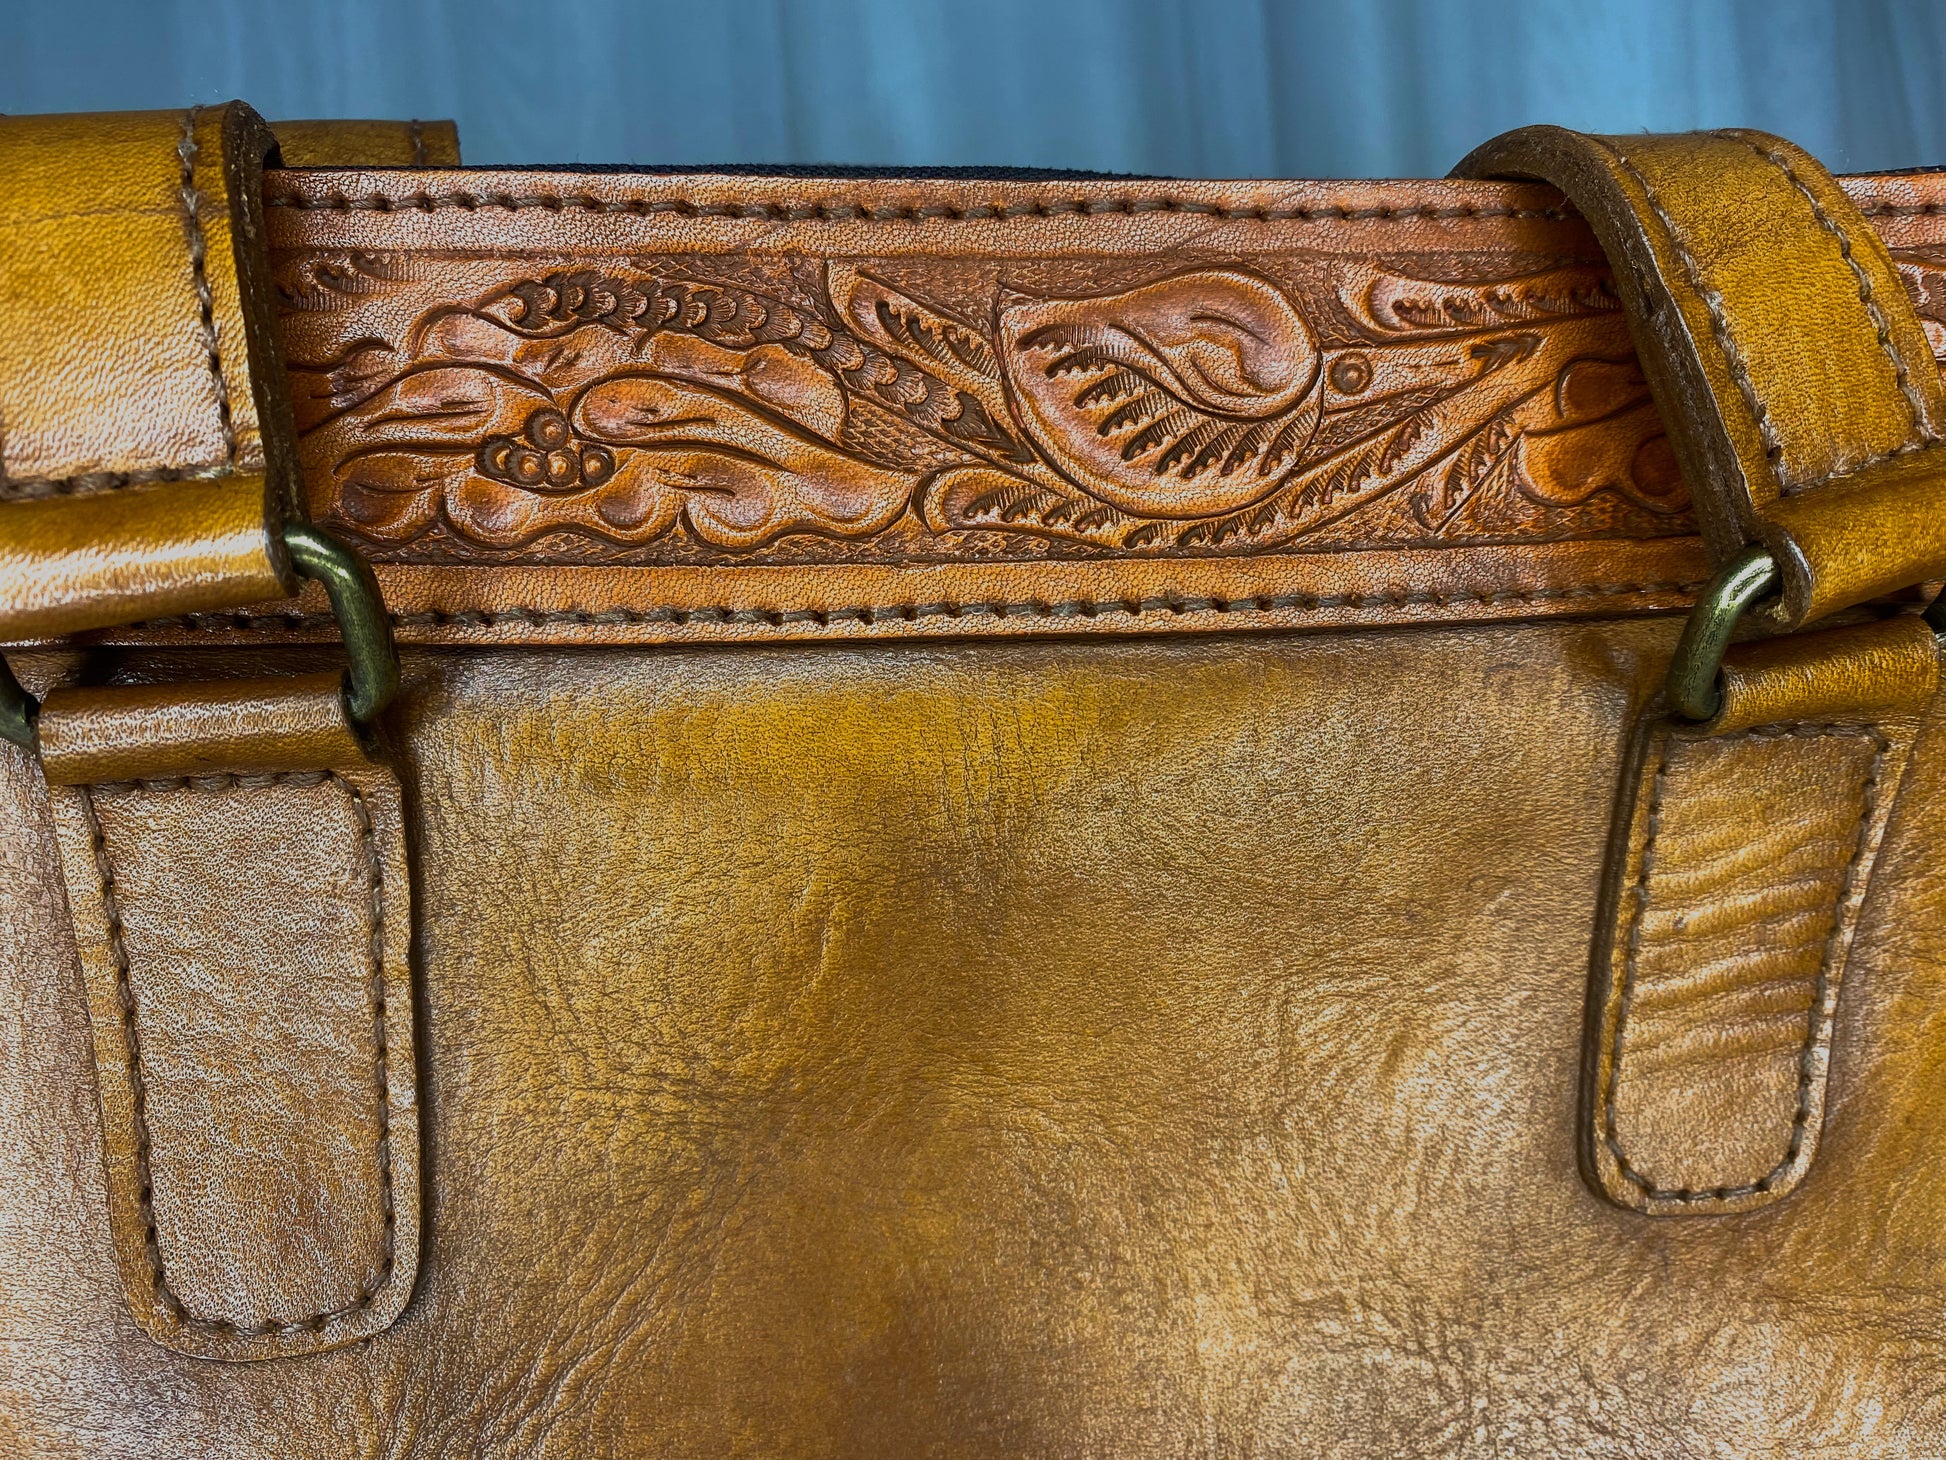 Medium-sized full leather messenger bag with one inch of traditional mexican Etching on the upper portion of the bag. Fully lined with suede.  Camel Mexican etching  detail.